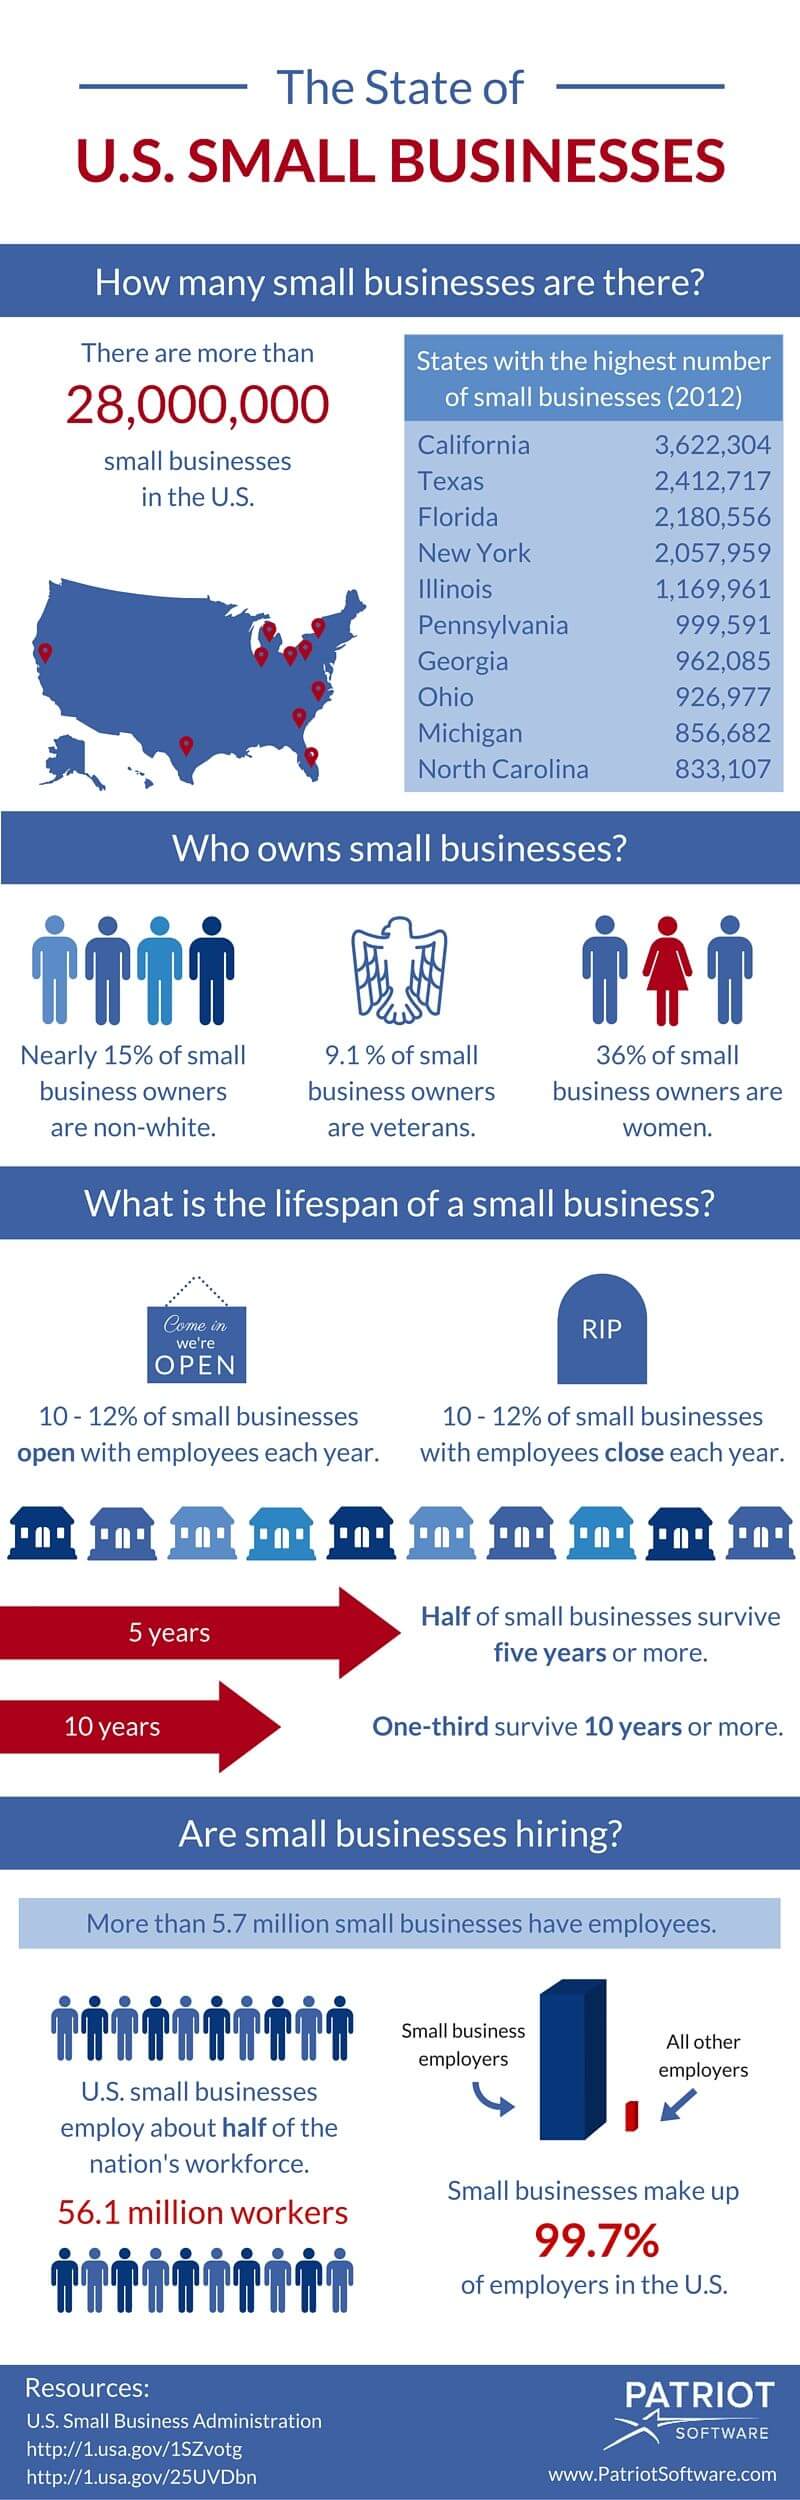 The State of Small Businesses in the U.S. Infographic